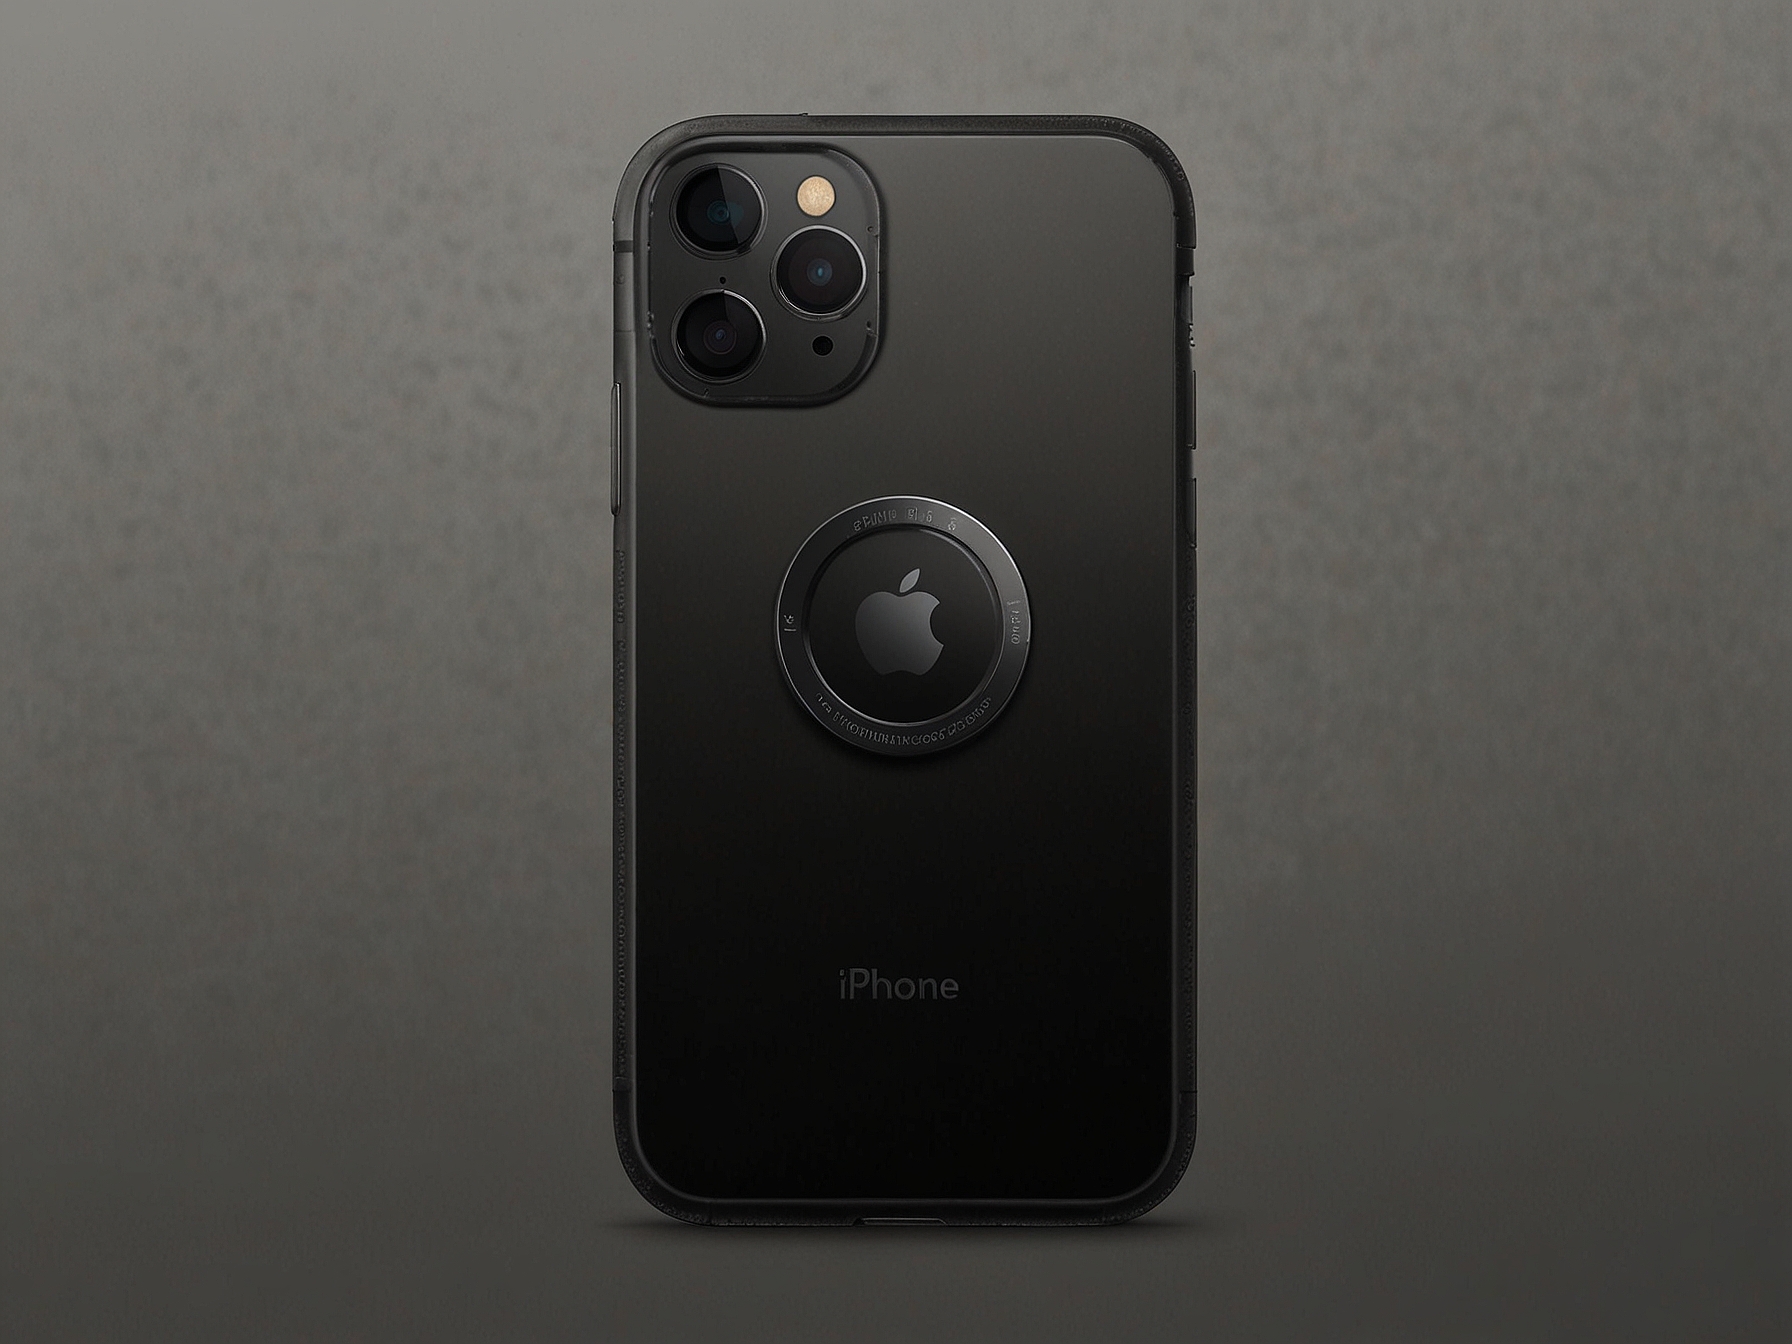 A sleek iPhone 16 showcasing its enhanced camera system, positioned to highlight new low-light photography and computational features aimed at attracting photography enthusiasts.